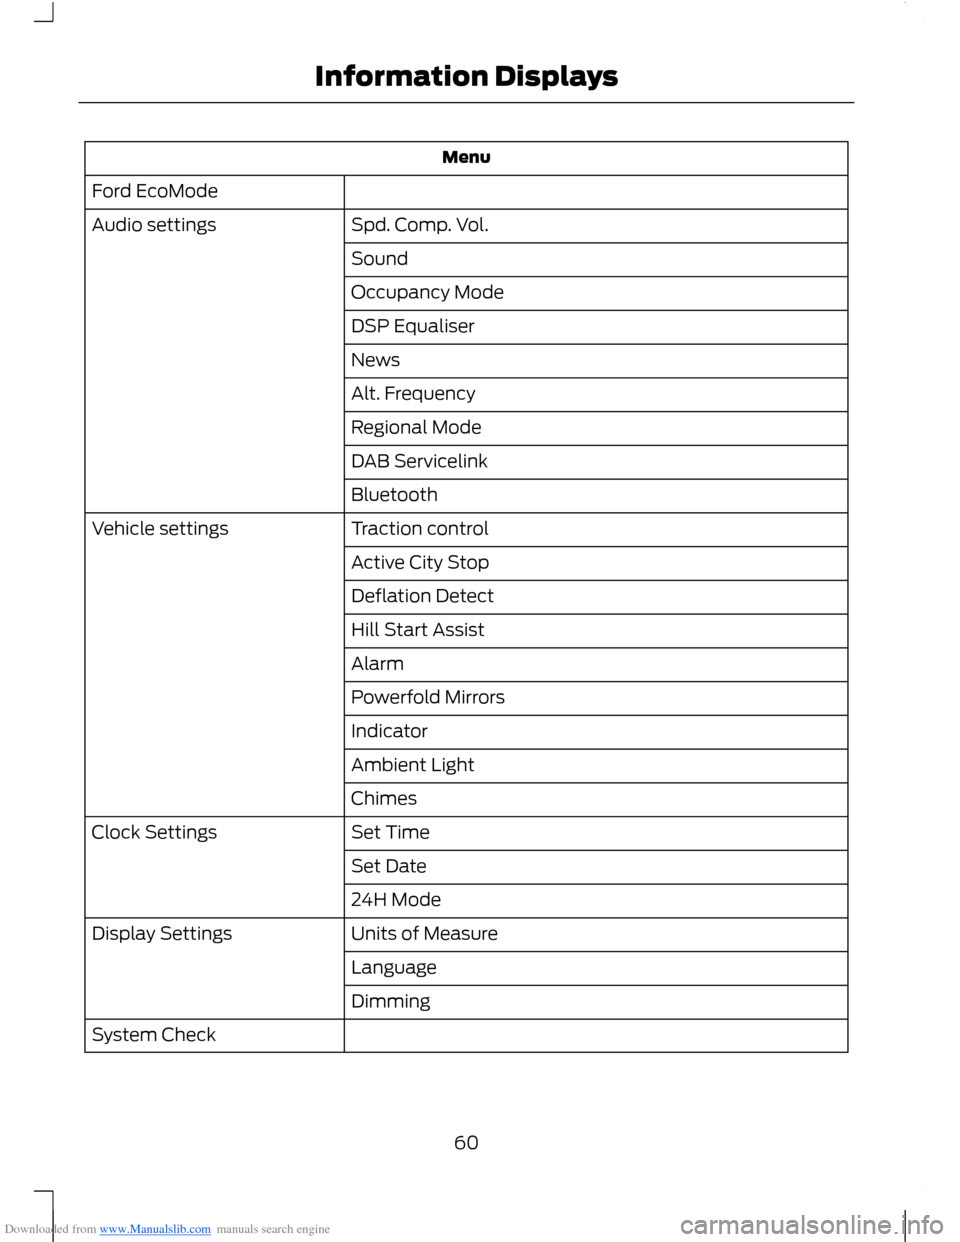 FORD B MAX 2012 1.G Owners Manual Downloaded from www.Manualslib.com manuals search engine Menu
Ford EcoMode
Spd. Comp. Vol.Audio settings
Sound
Occupancy Mode
DSP Equaliser
News
Alt. Frequency
Regional Mode
DAB Servicelink
Bluetooth
